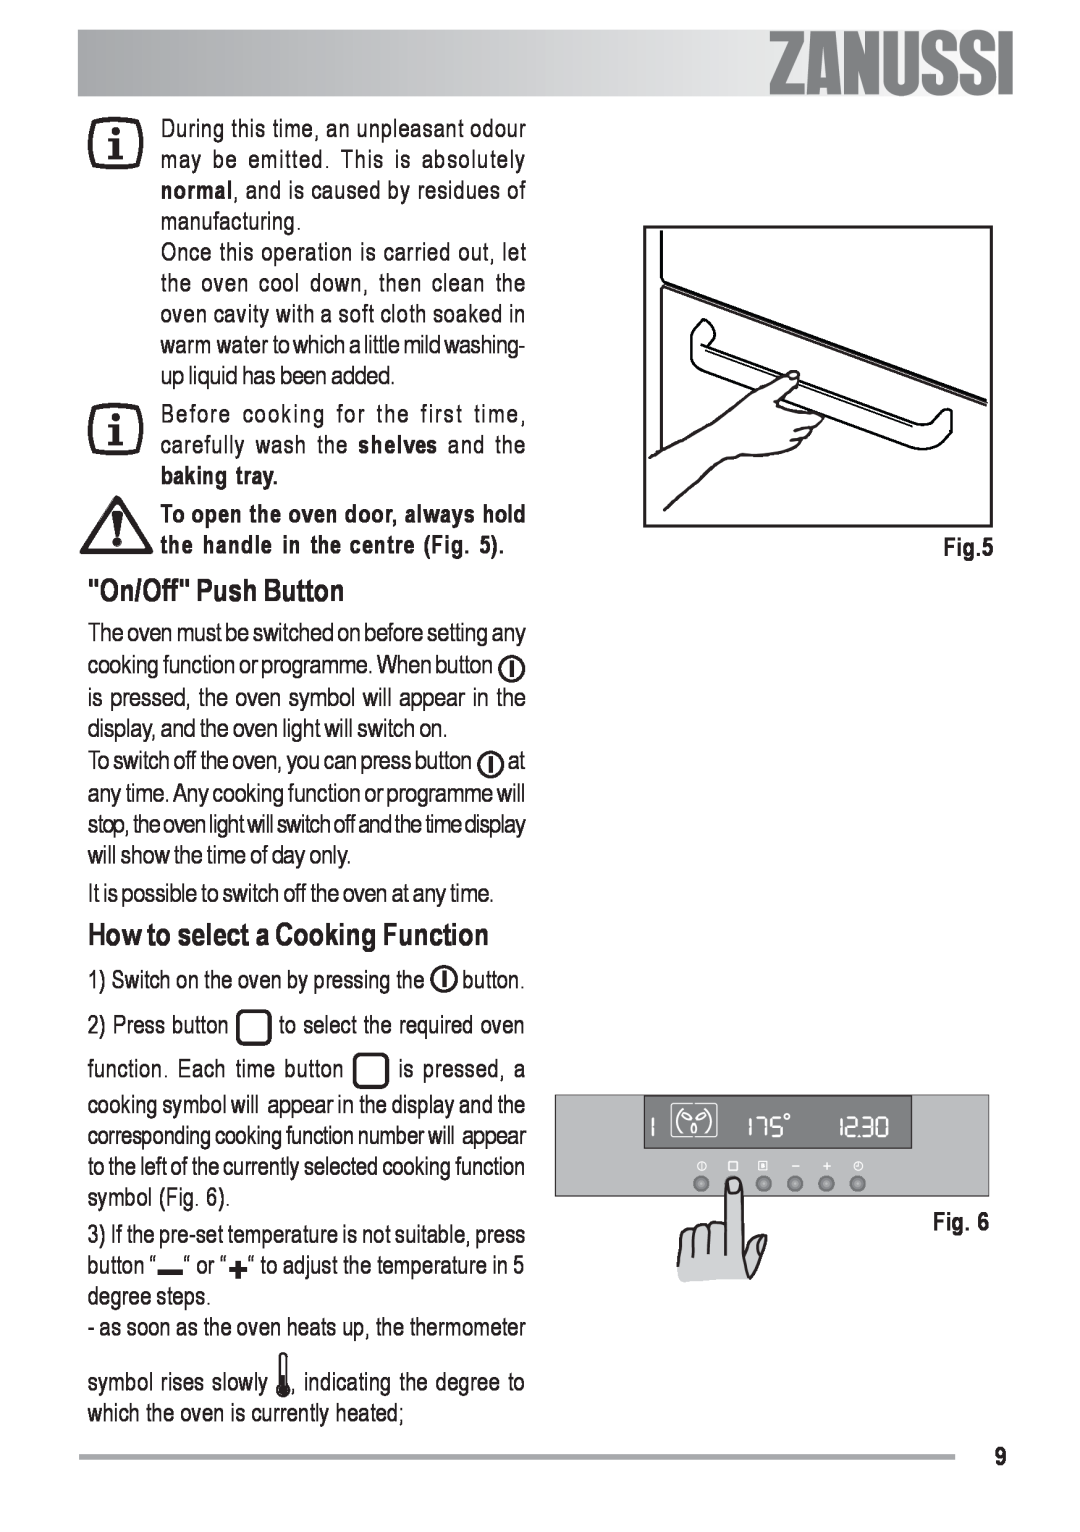 Zanussi ZOB 691 On/Off Push Button, How to select a Cooking Function, It is possible to switch off the oven at any time 